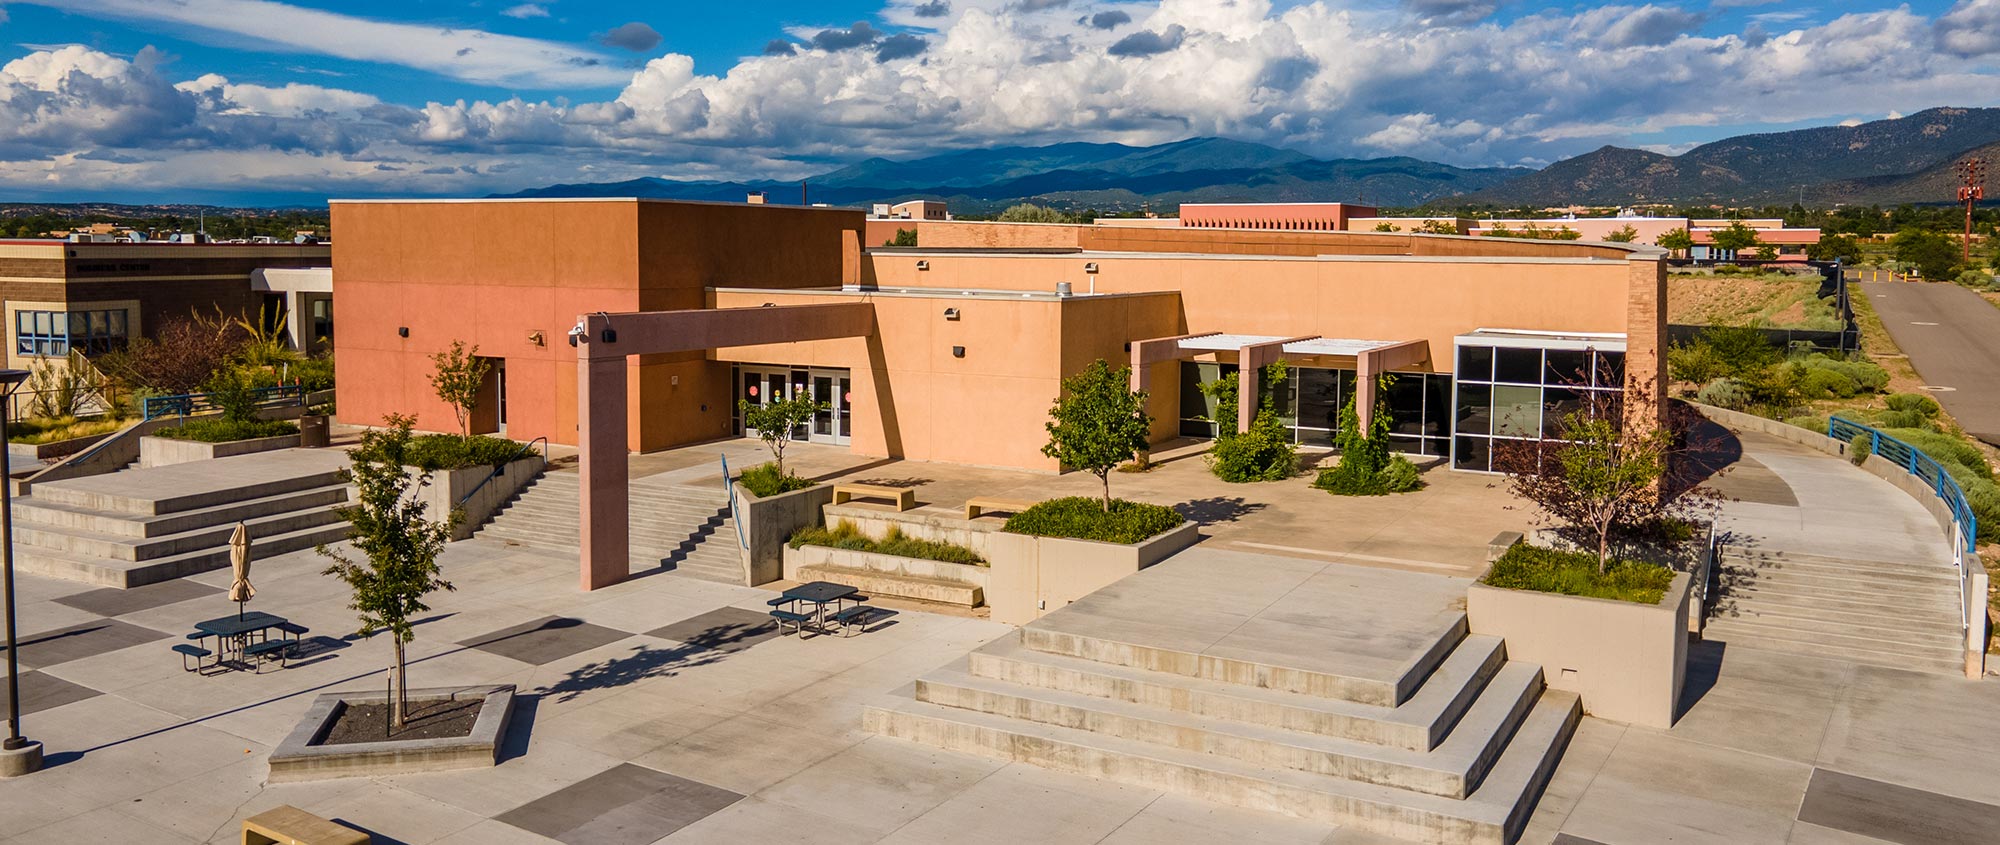 A Santa Fe Public School campus with mountains and clouds in the back ground in Santa Fe, NM